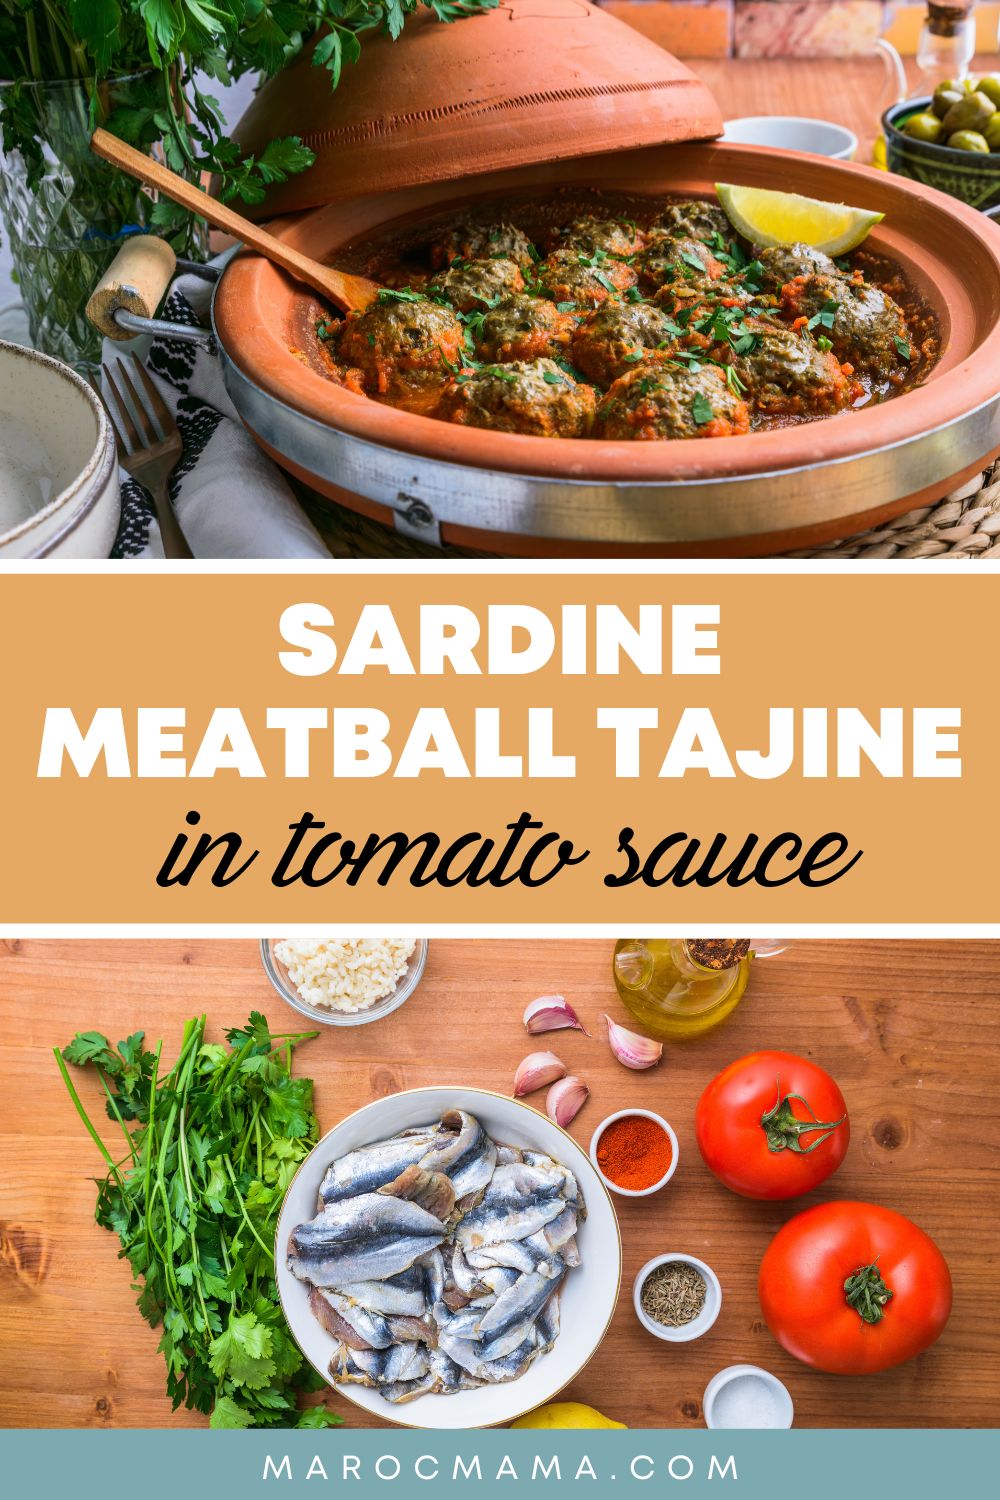 Top image is Moroccan sardine meatballs tagine cooked in tomato sauce, bottom image is the ingredients in making this dish